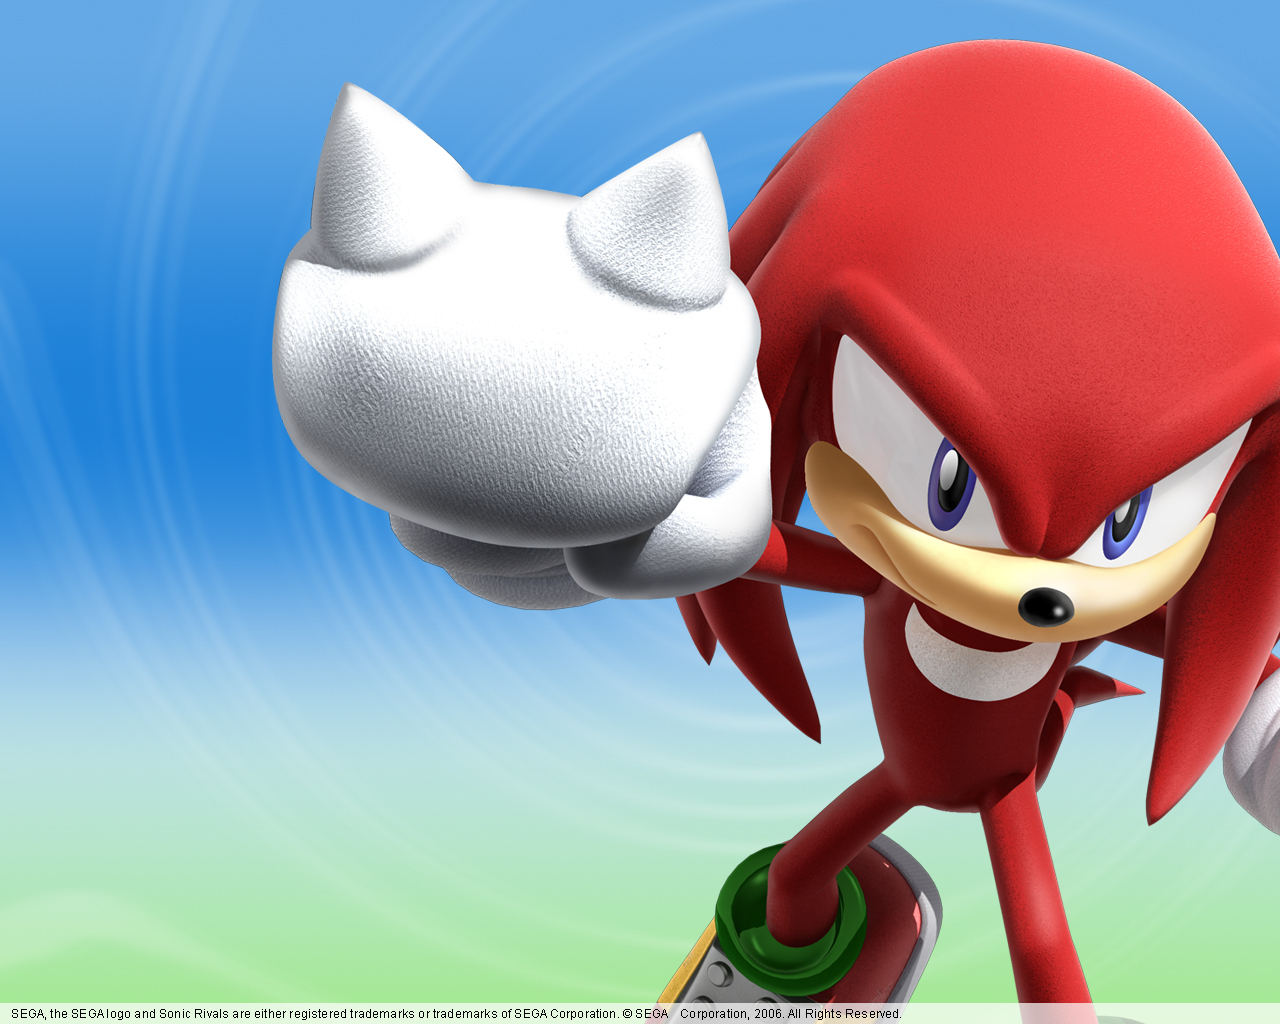 Sonic Rivals Knuckles - Knuckles the Echidna Wallpaper 1870564